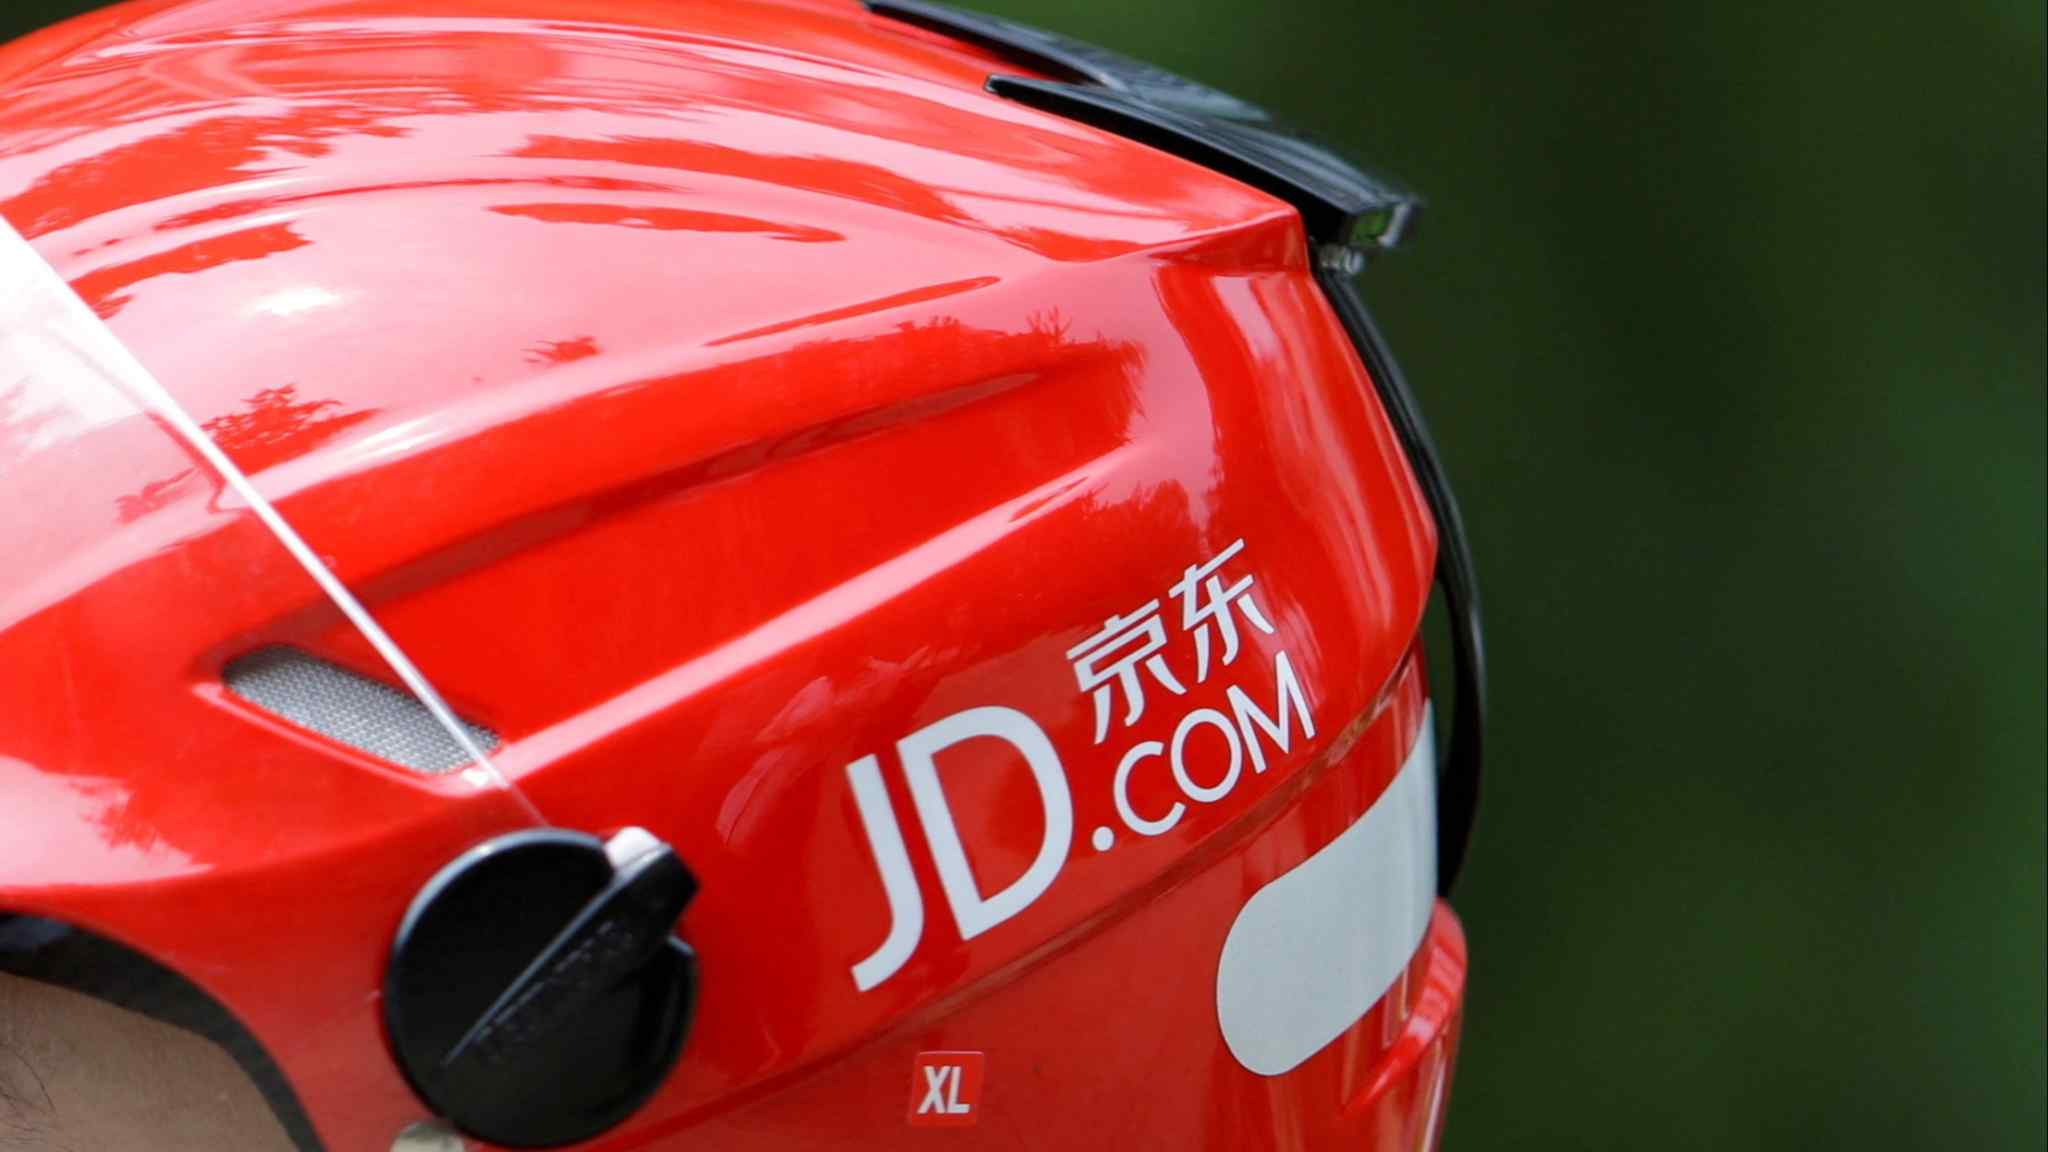 JD.com to slash pay for top staff as China growth slows